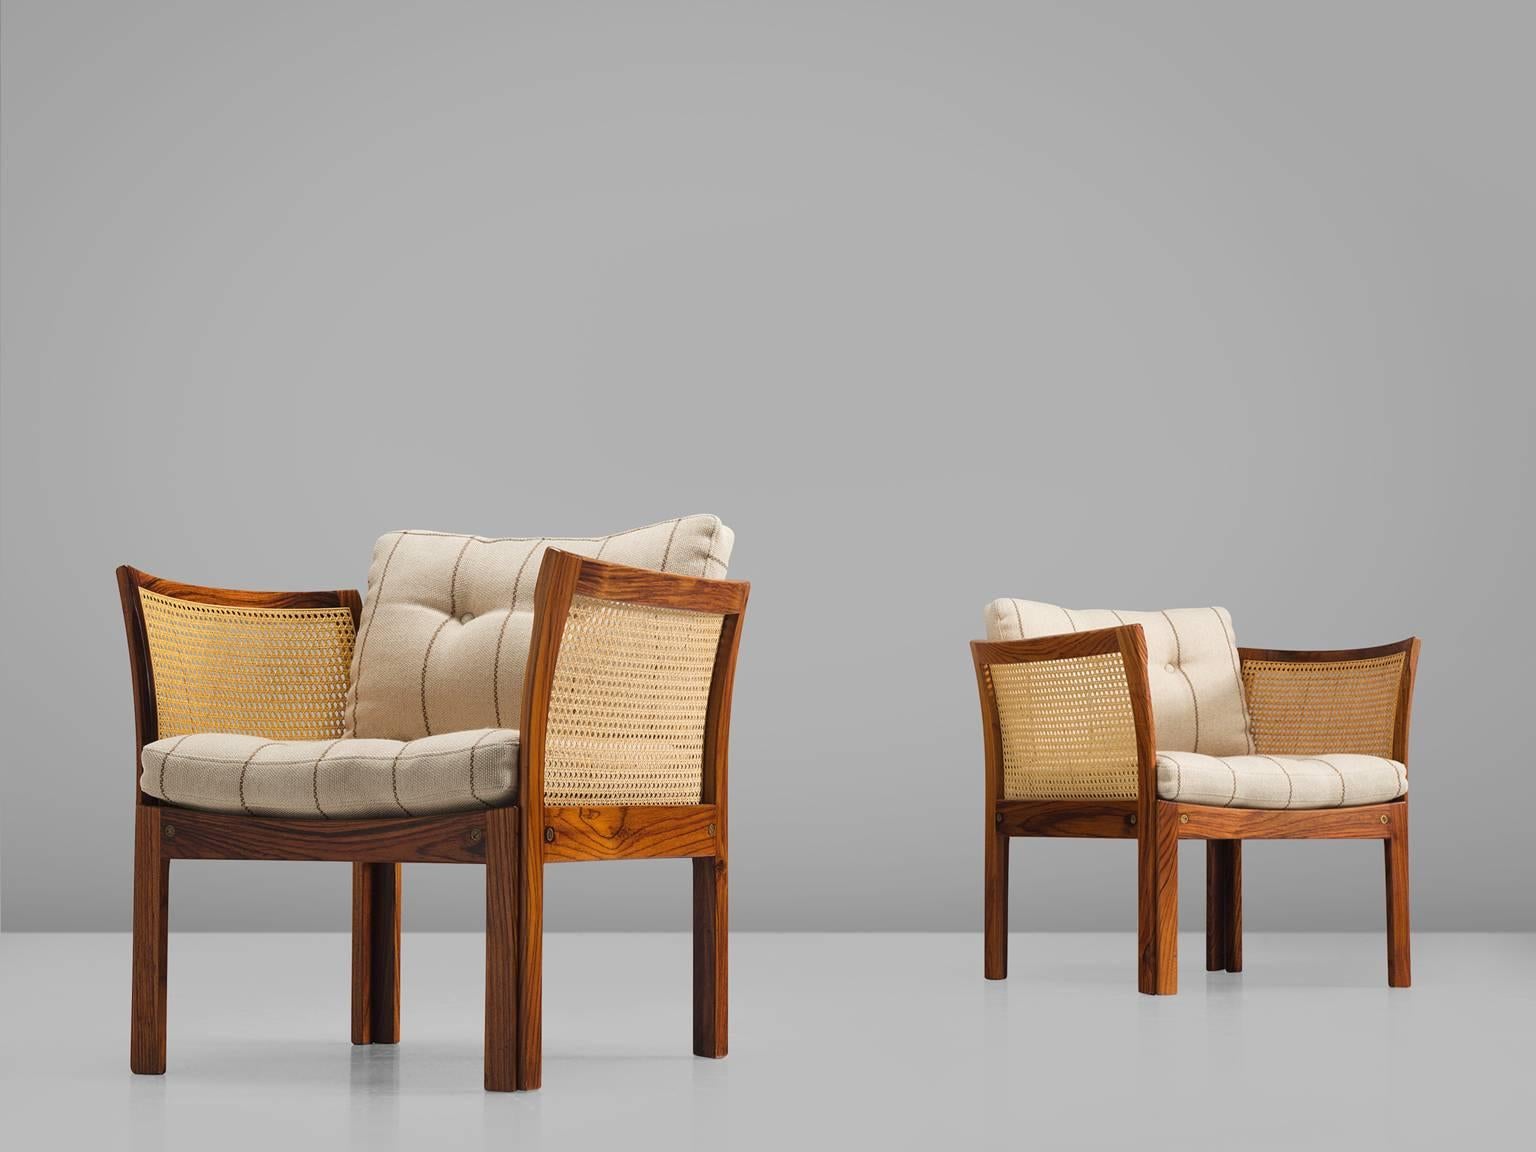 Illum Wikkelsø for C. F. C., Silkeborg, 'Plexus', rosewood, cane and white striped wool, Denmark, 1950s

This set of easy chairs by Illum Wikkelsoø is part of the midcentury design collection. The chairs most distinctive feature are the rosewood arm